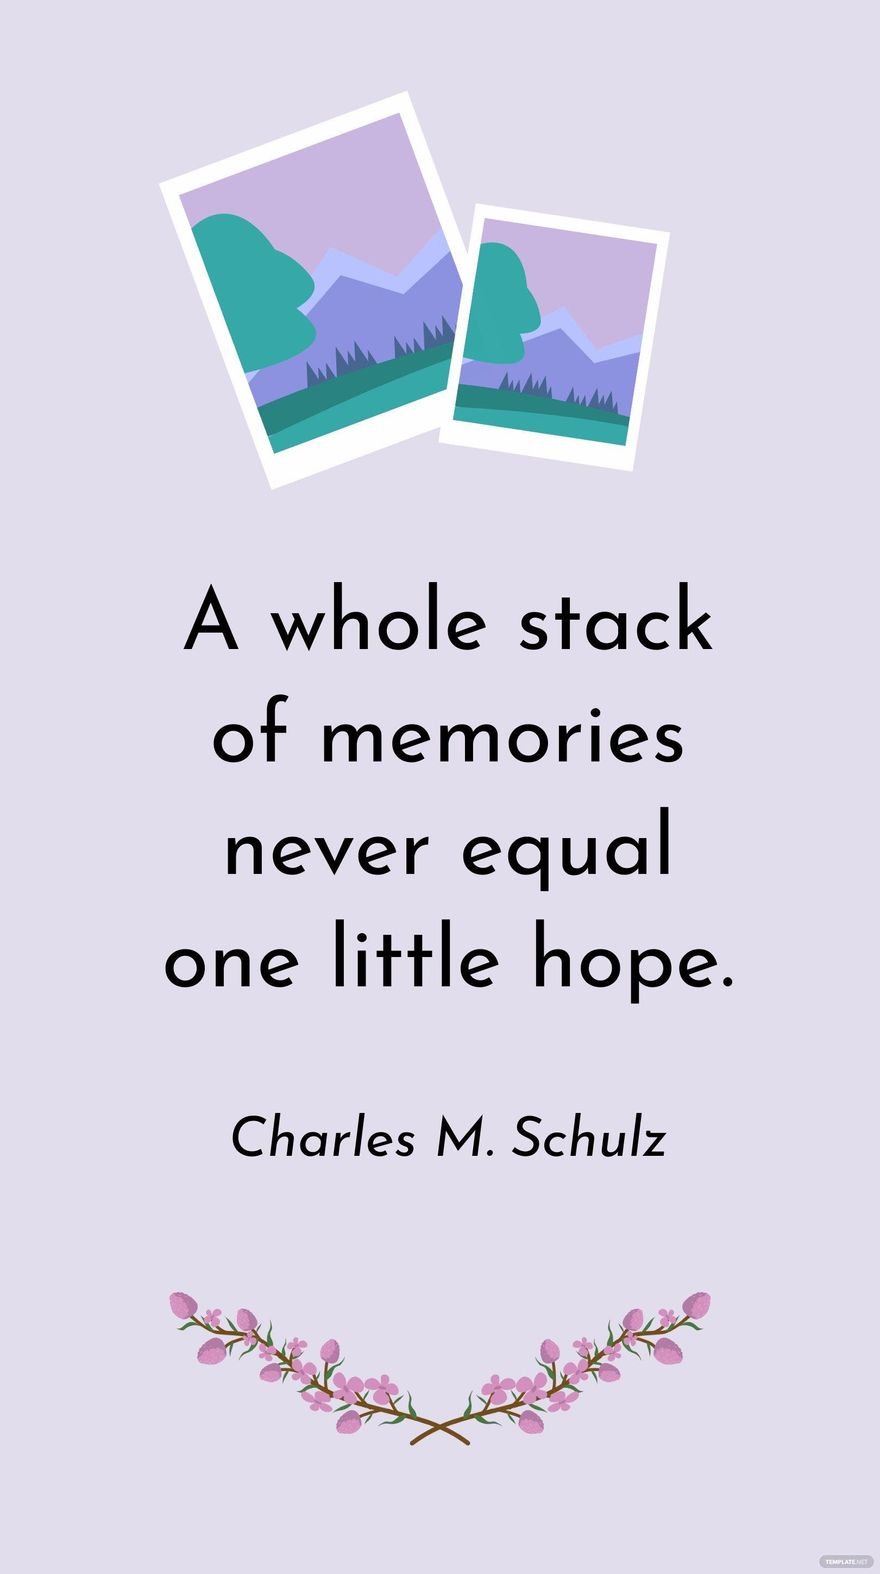 Charles M. Schulz - A whole stack of memories never equal one little hope.